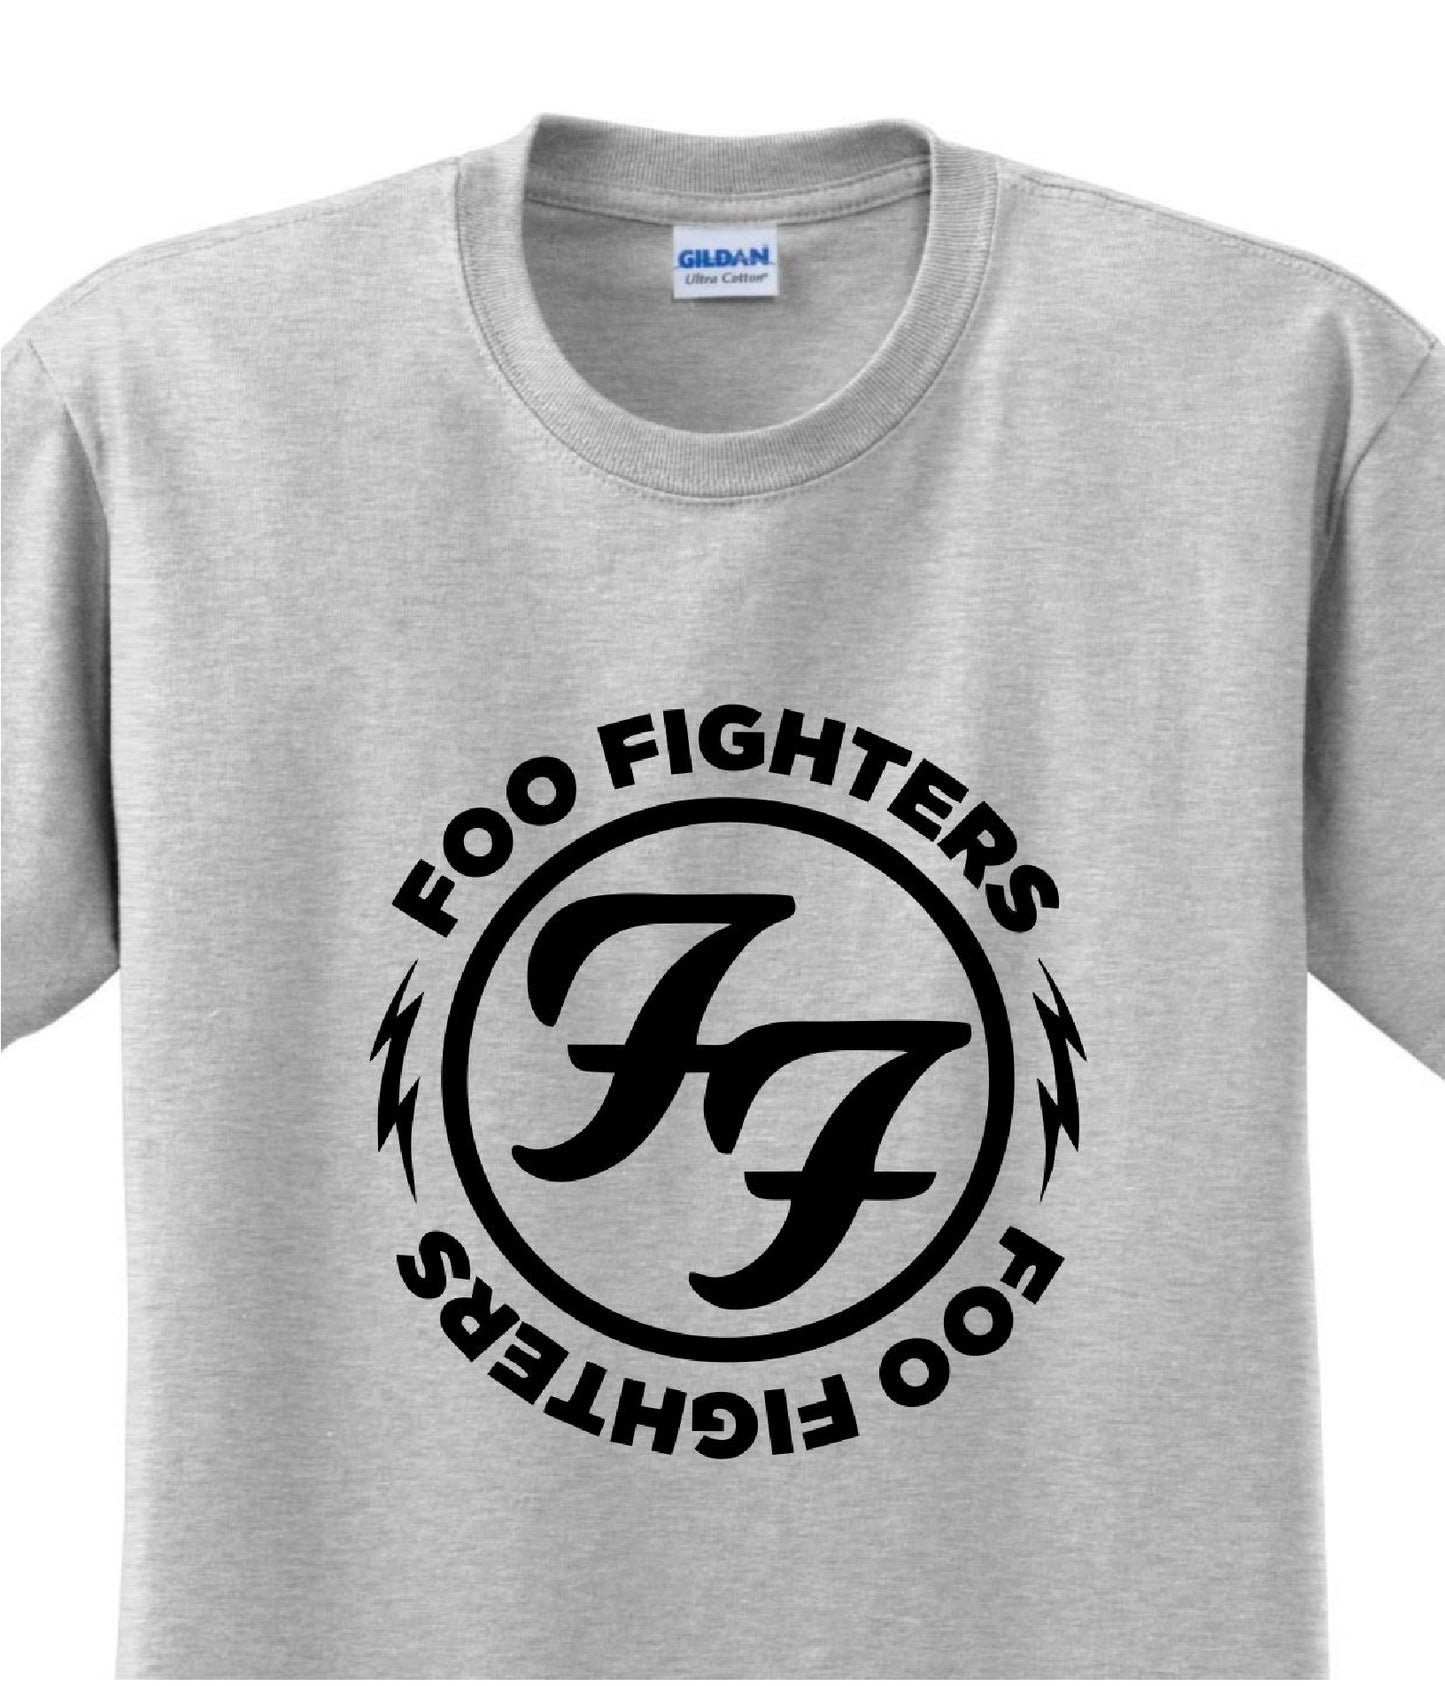 Radical Band  Men's Shirts - Food Fighters (Gray) - MYSTYLEMYCLOTHING